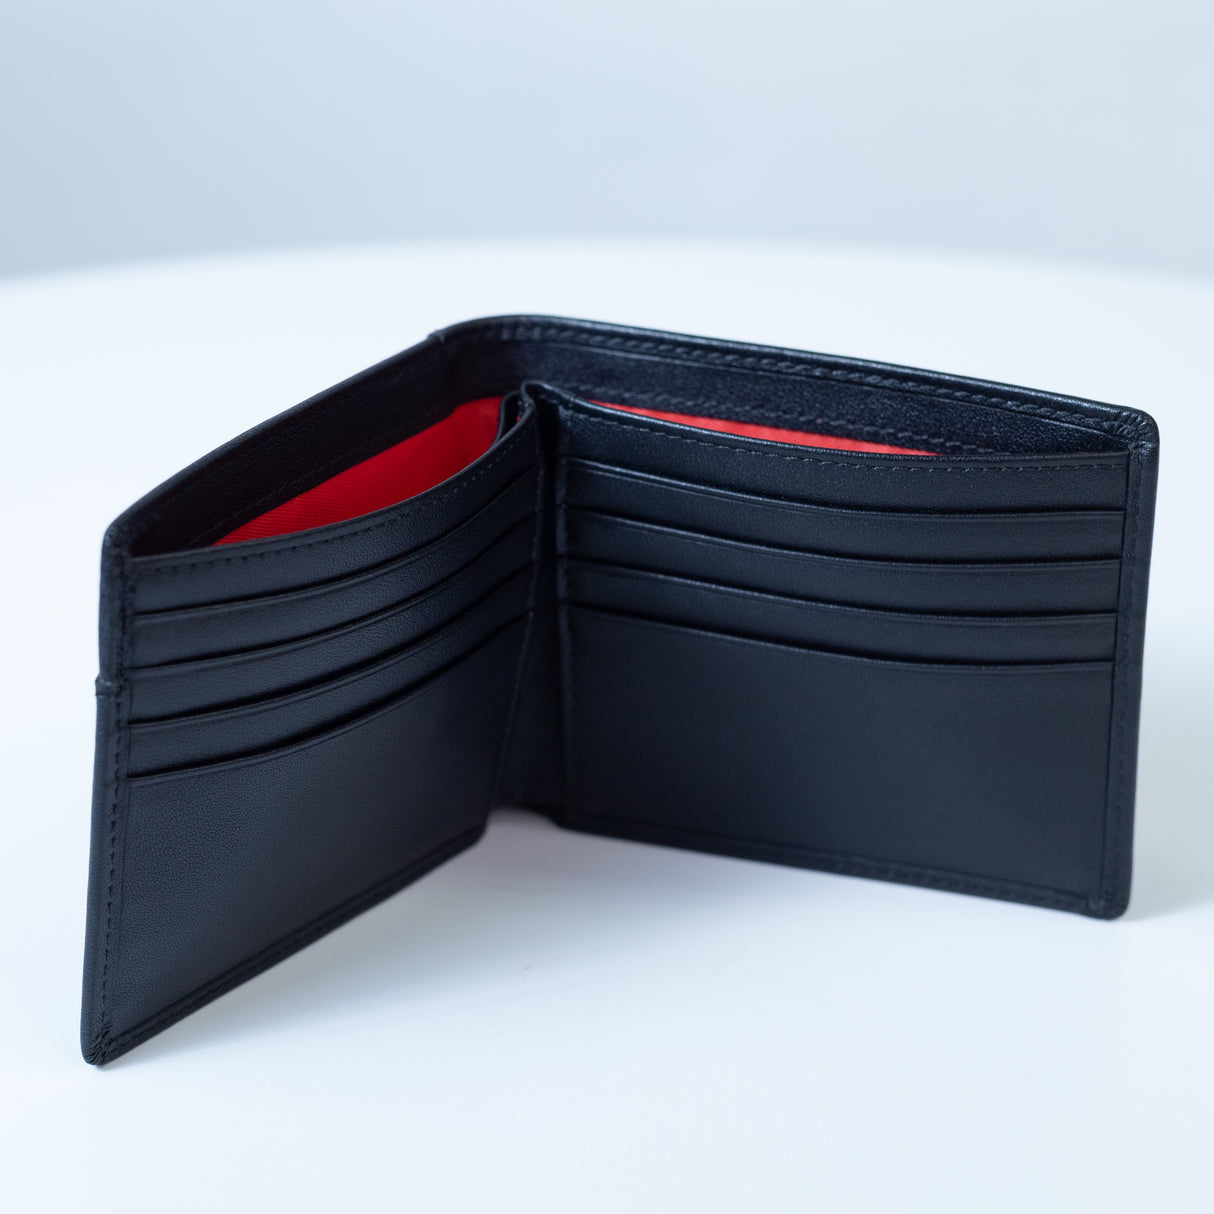 Valuetainment Wallet with Pockets - Black